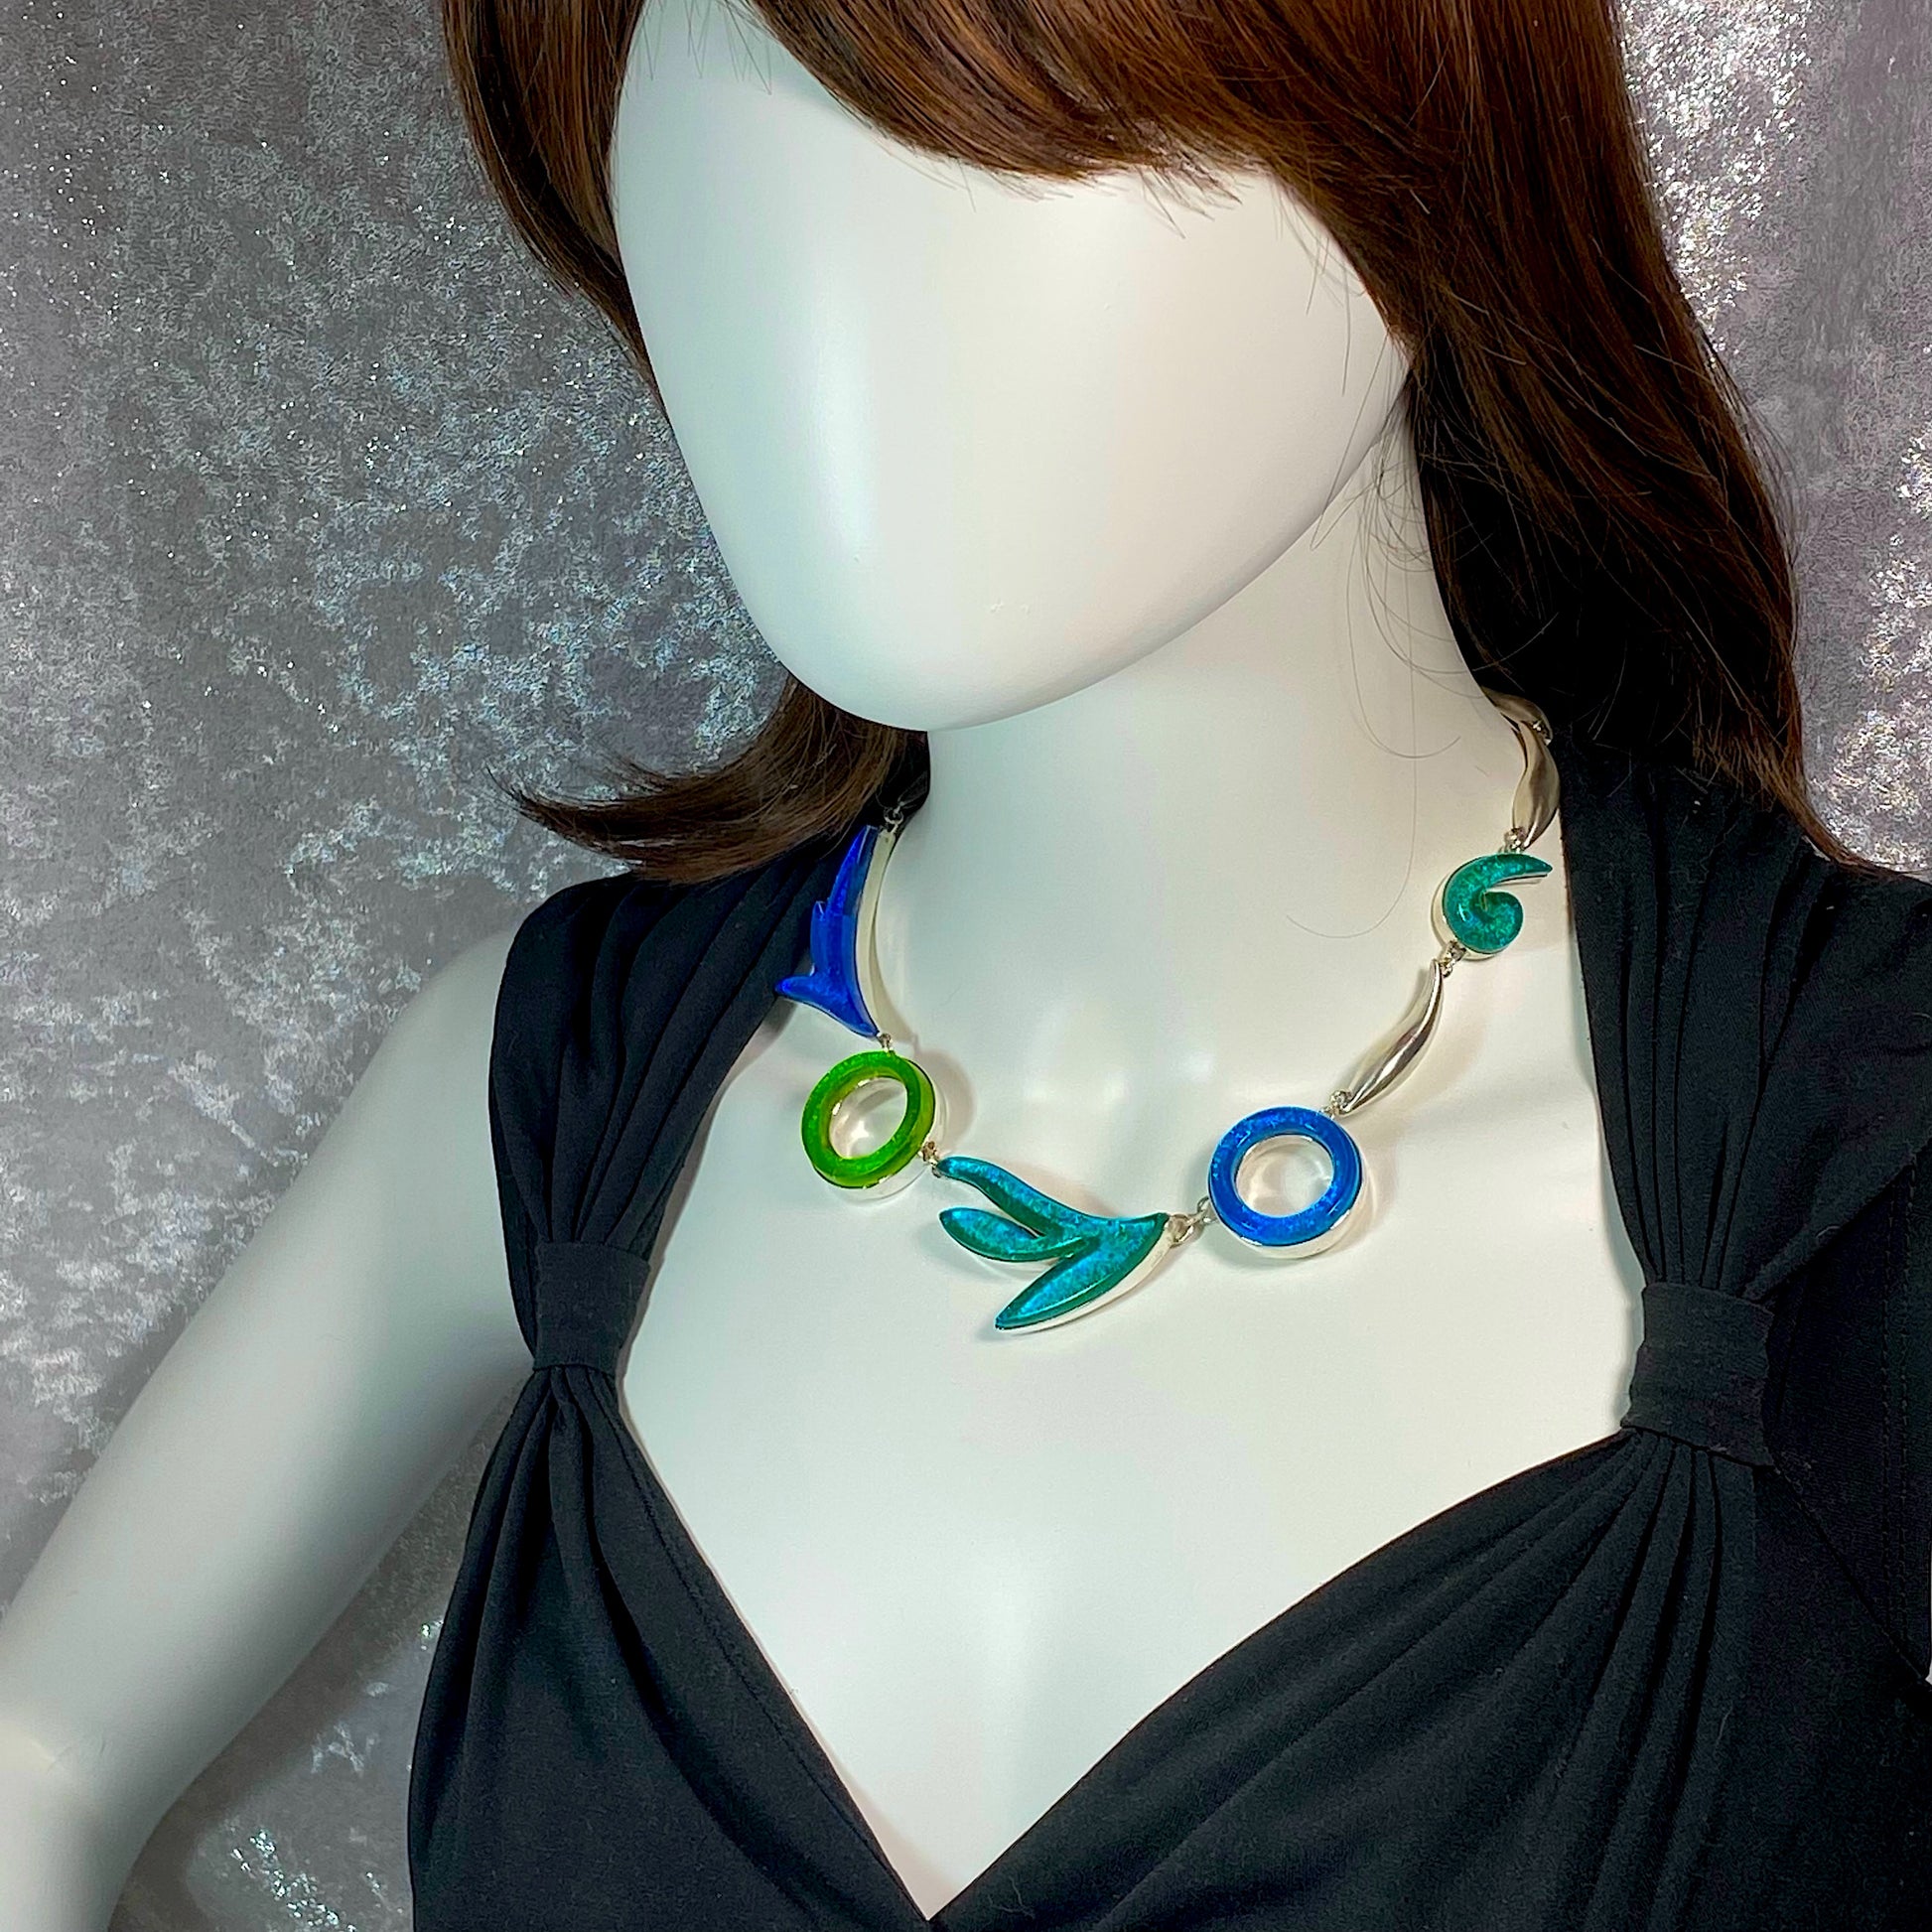 Statement necklace in turquoise, green, teal, azure colored glass in sterling silver, fused glass, glass jewelry, glass and silver jewelry, handmade, handcrafted, American Craft, hand fabricated jewelry, hand fabricated jewellery, Athen, Georgia, colorful jewelry, sparkle, bullseye glass, dichroic glass, art jewelry